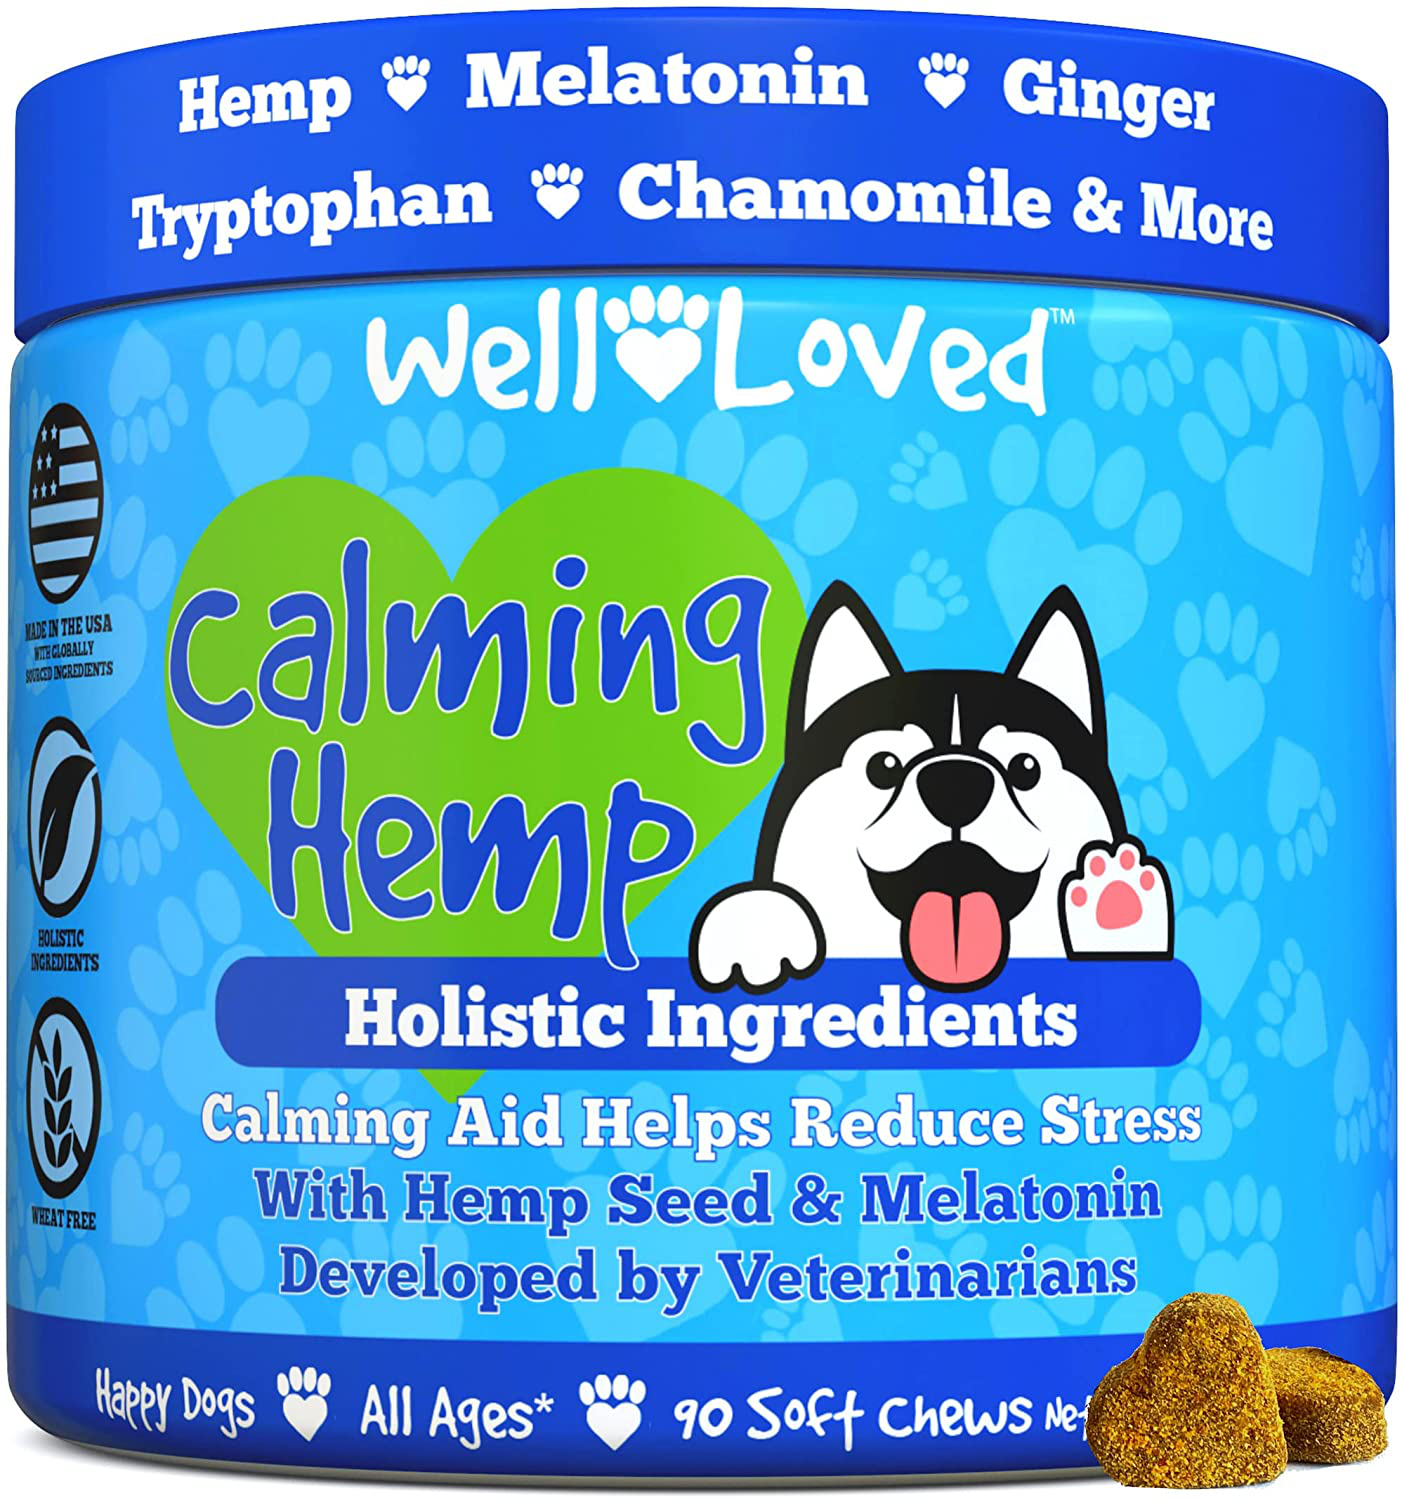 Products Designed to Help Calm Anxious & Nervous Dogs